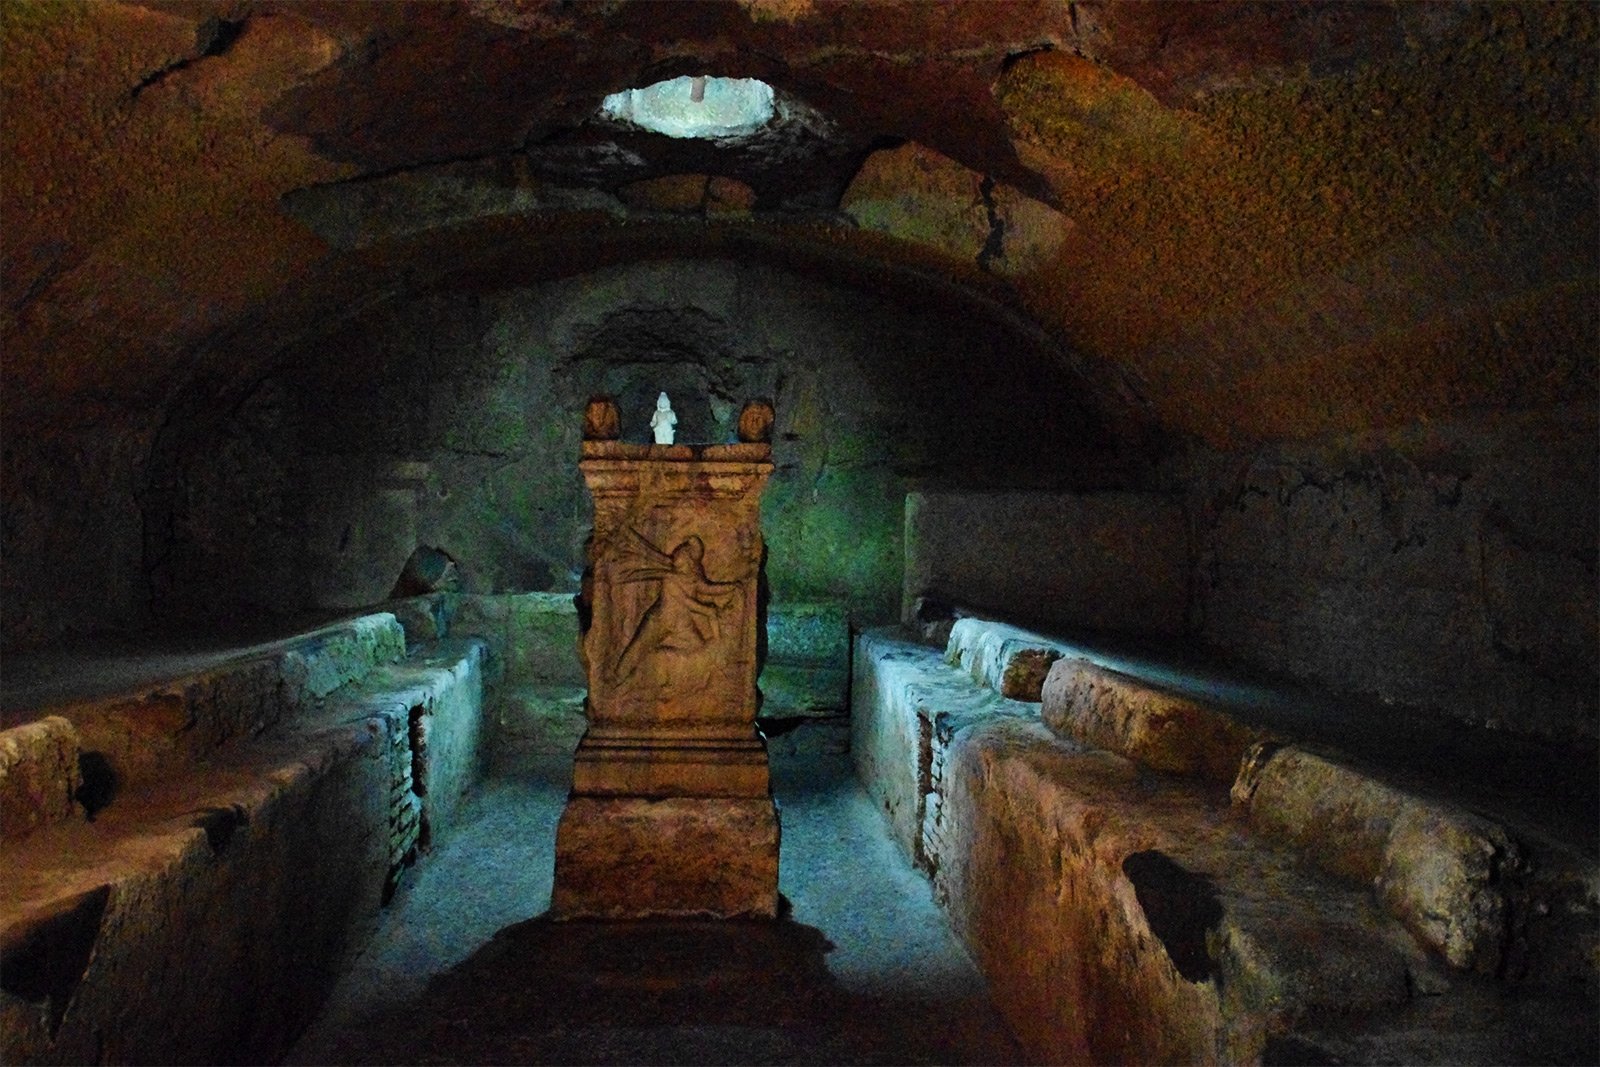 How to go down to the Mithraeum in Rome